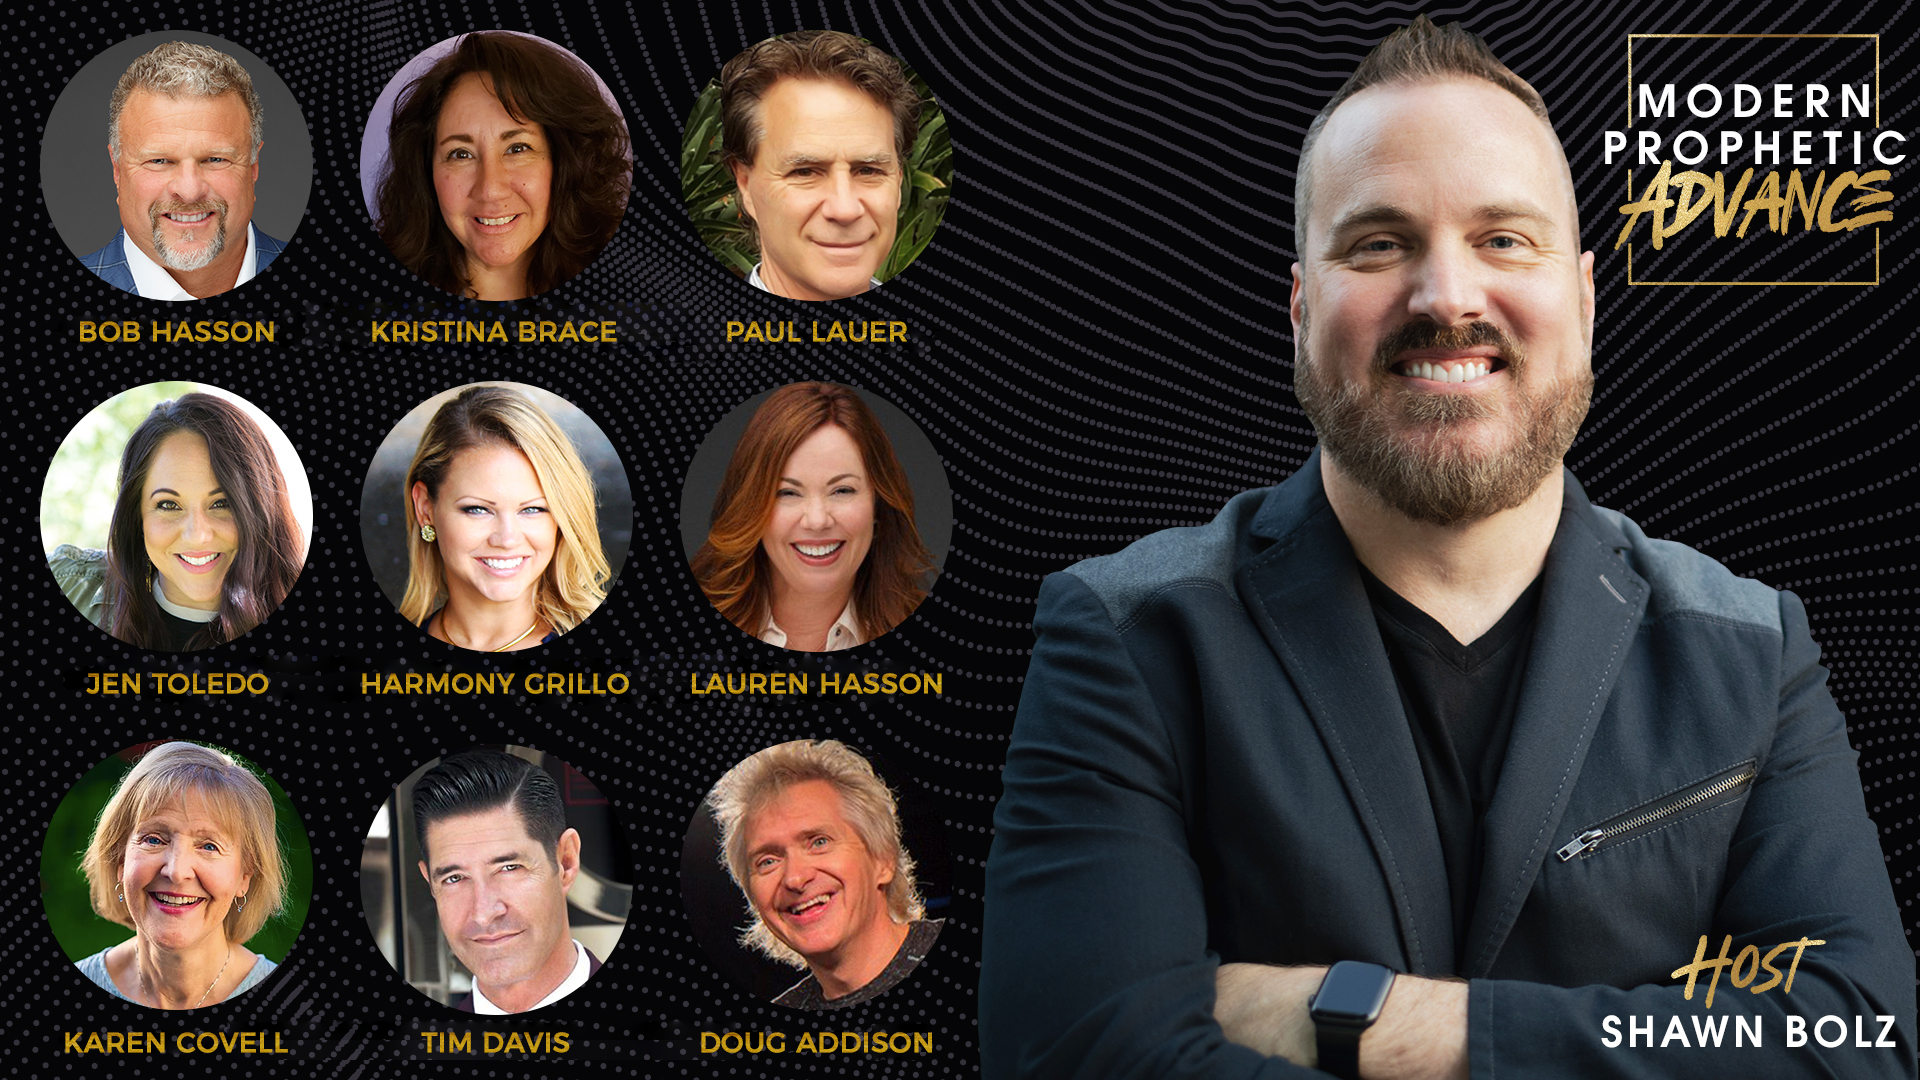 Pasadena, CA - Modern Prophetic Advance Seminar! with Shawn Bolz, Doug Addison and others